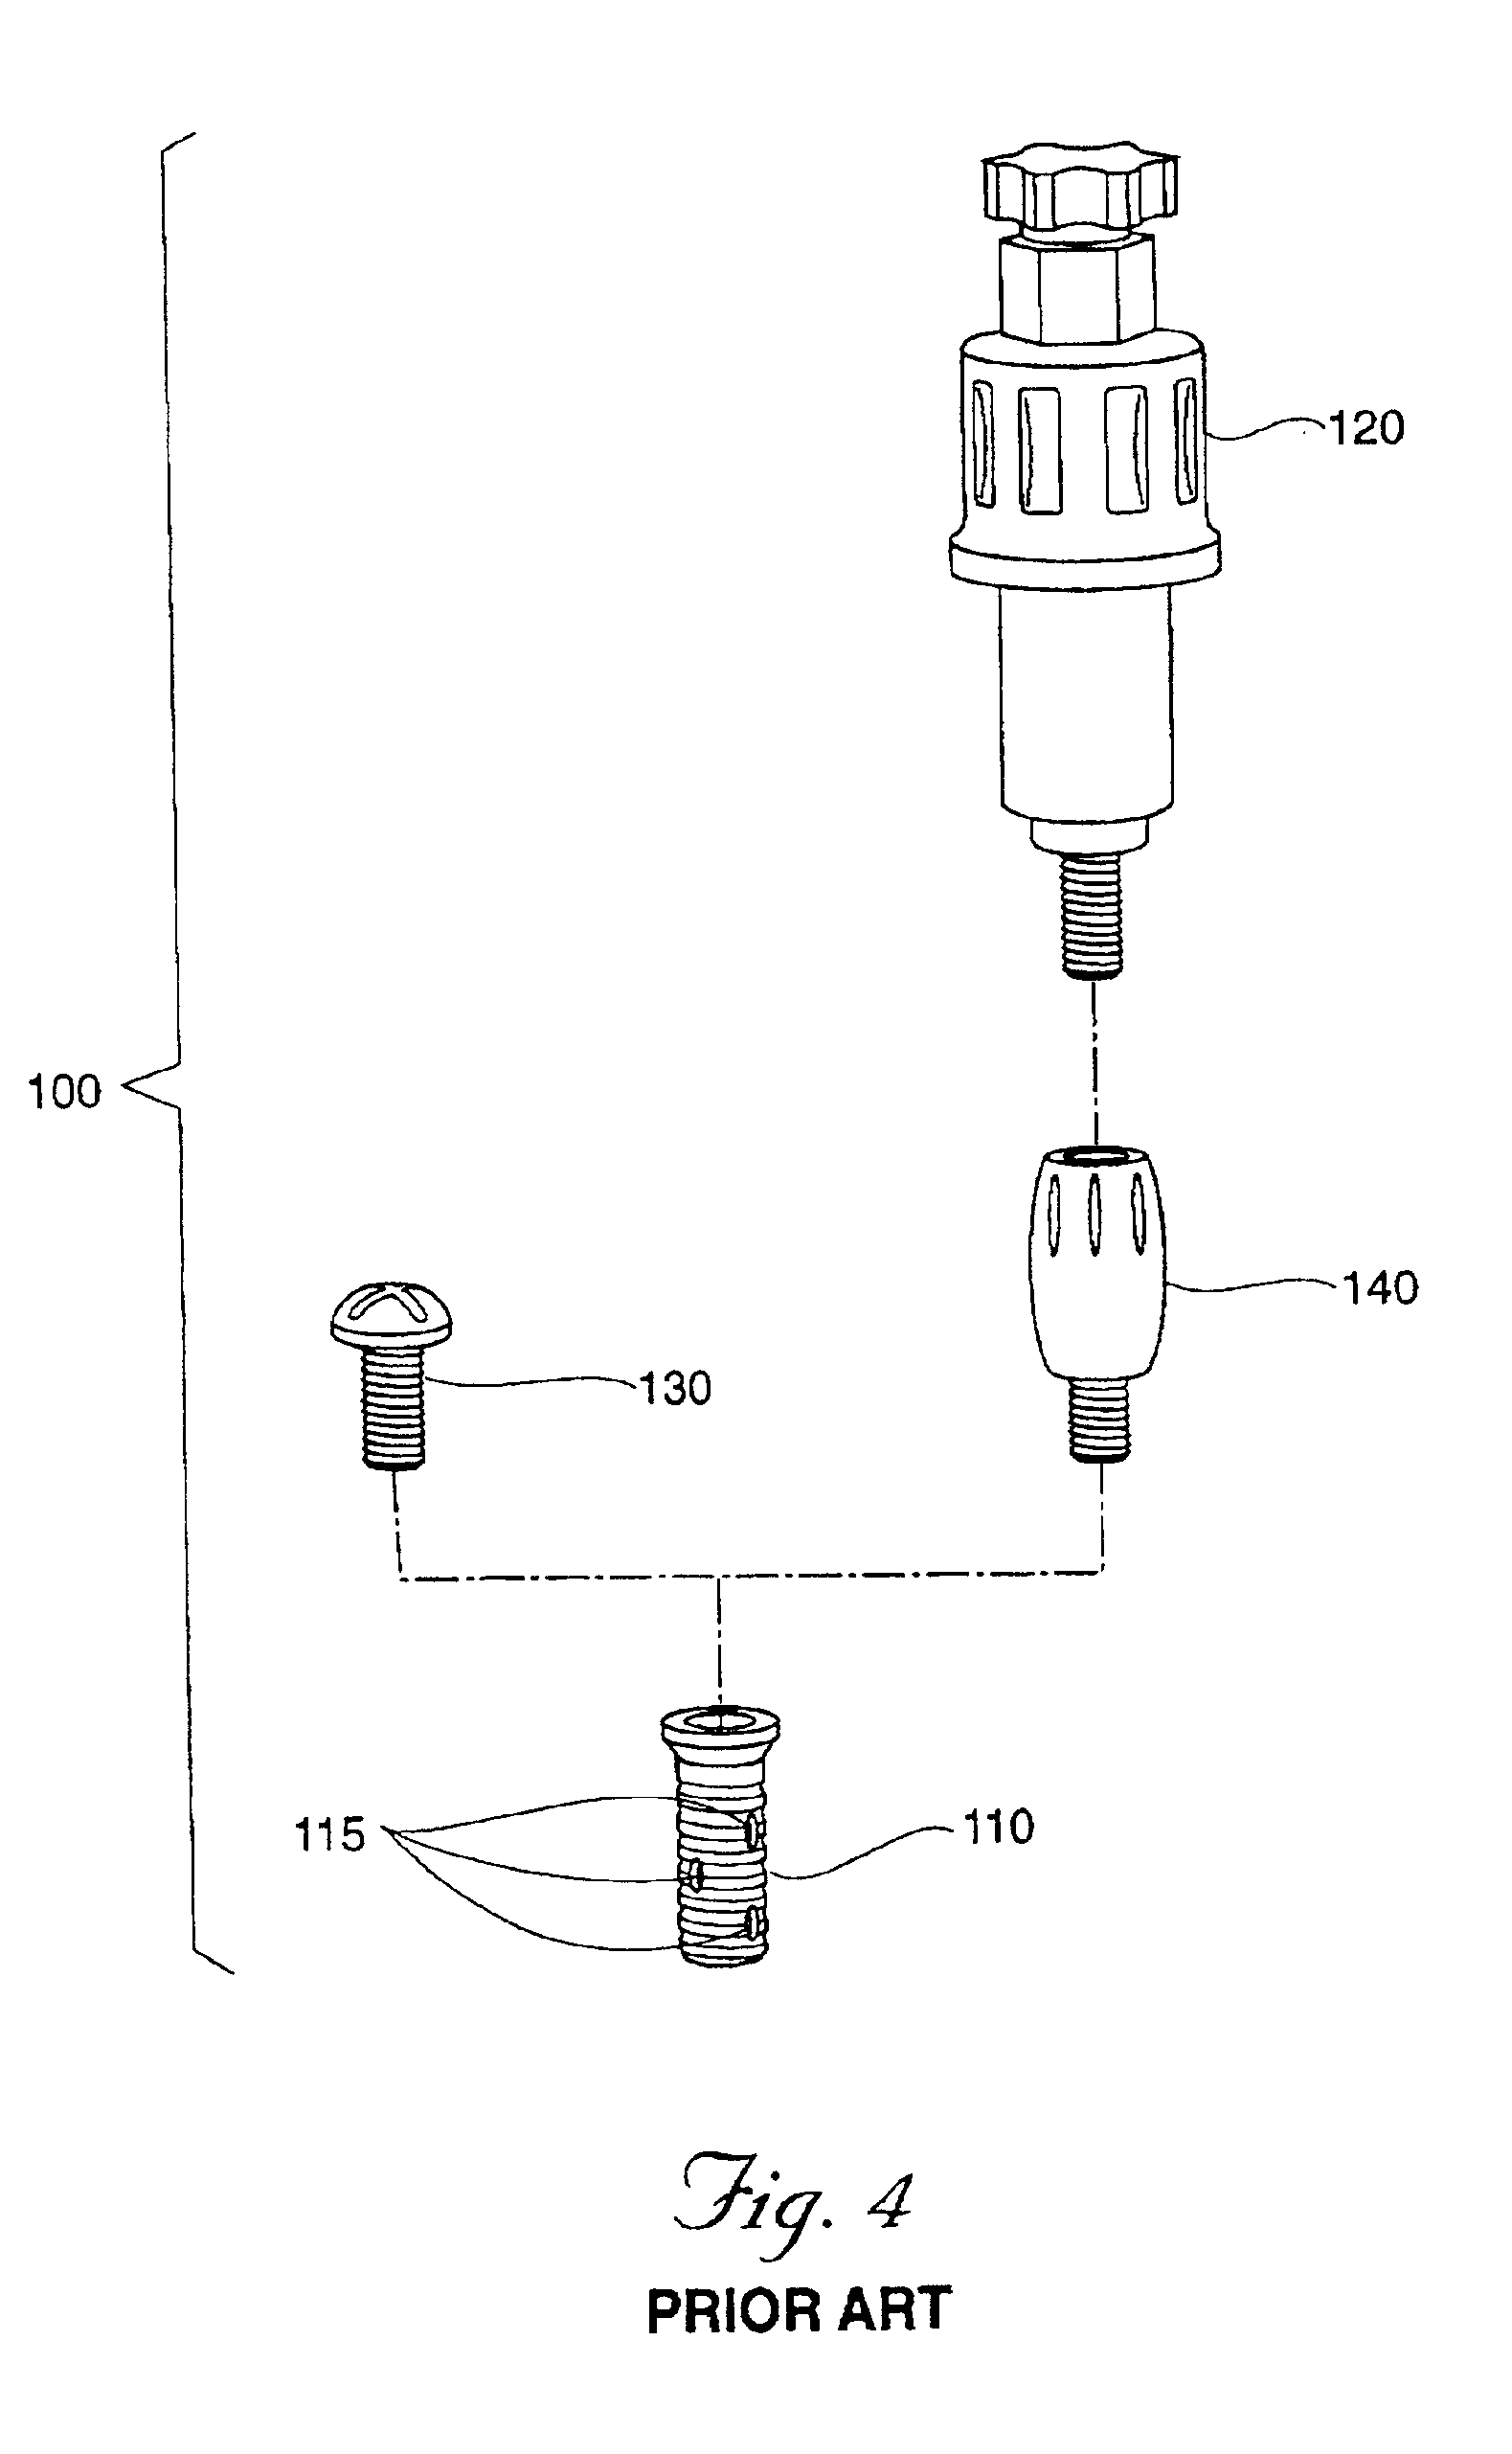 Expandable polymer dental implant and method of use